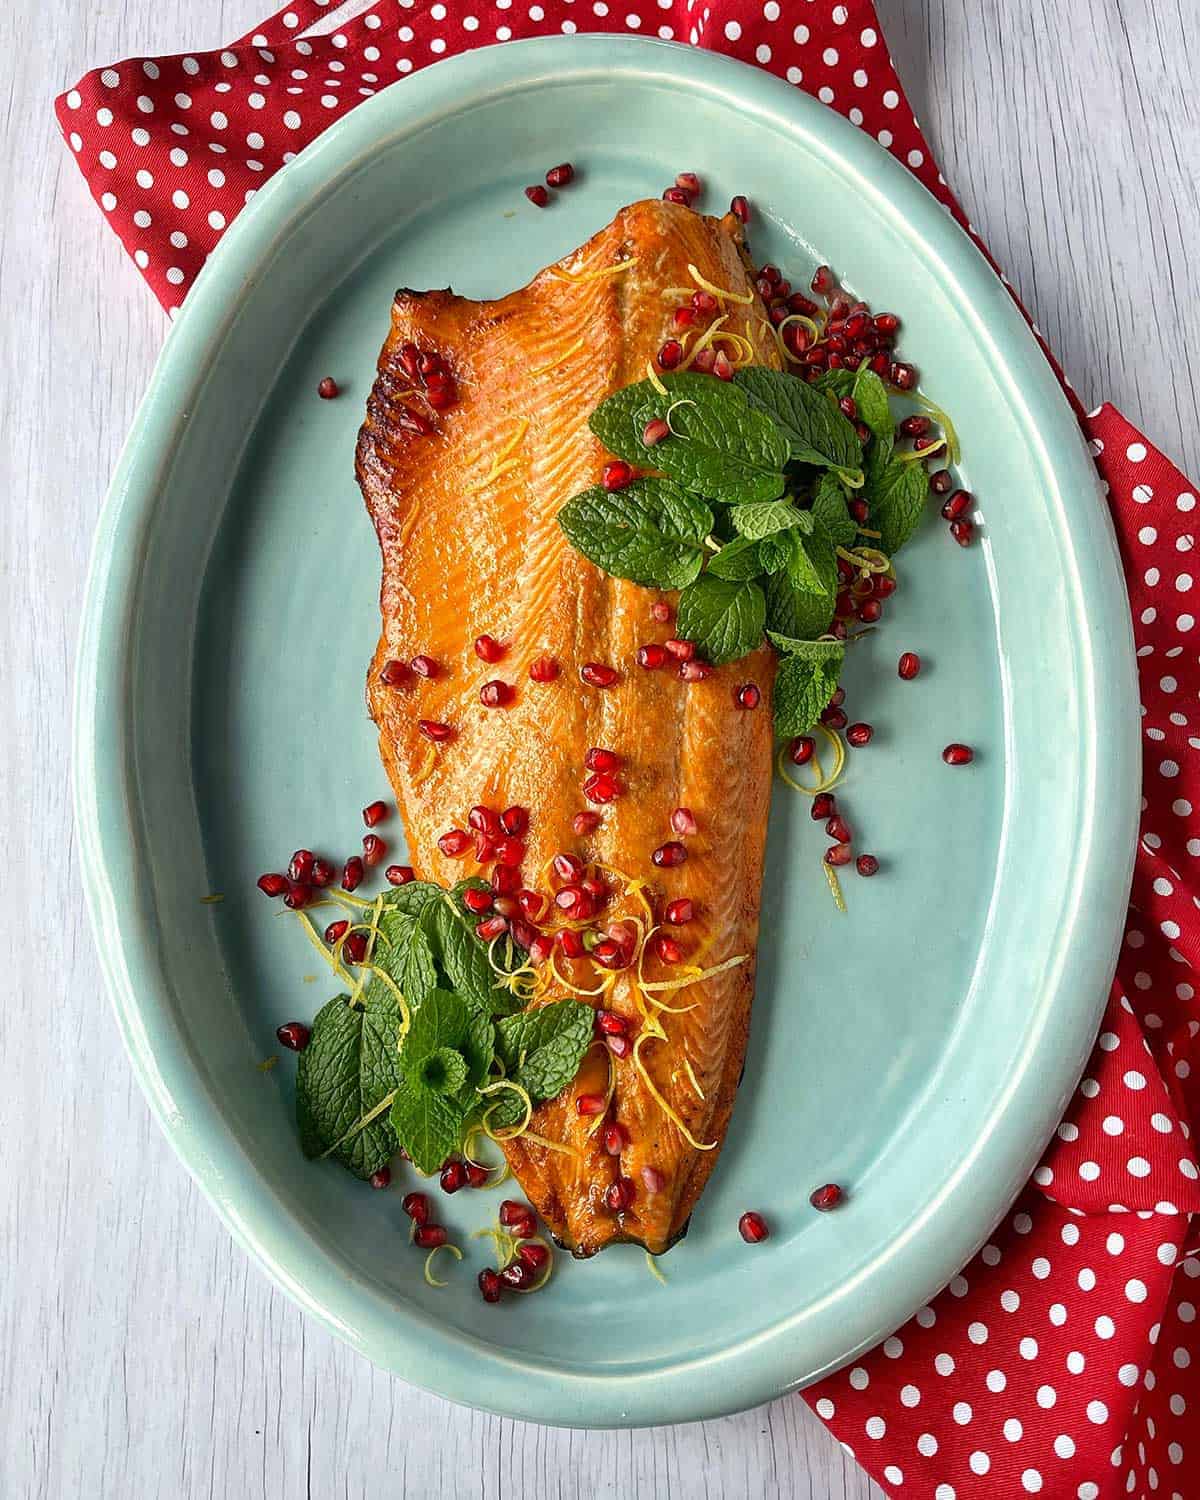 Cooked salmon garnished with pomegranate seeds and mint on a blue platter.